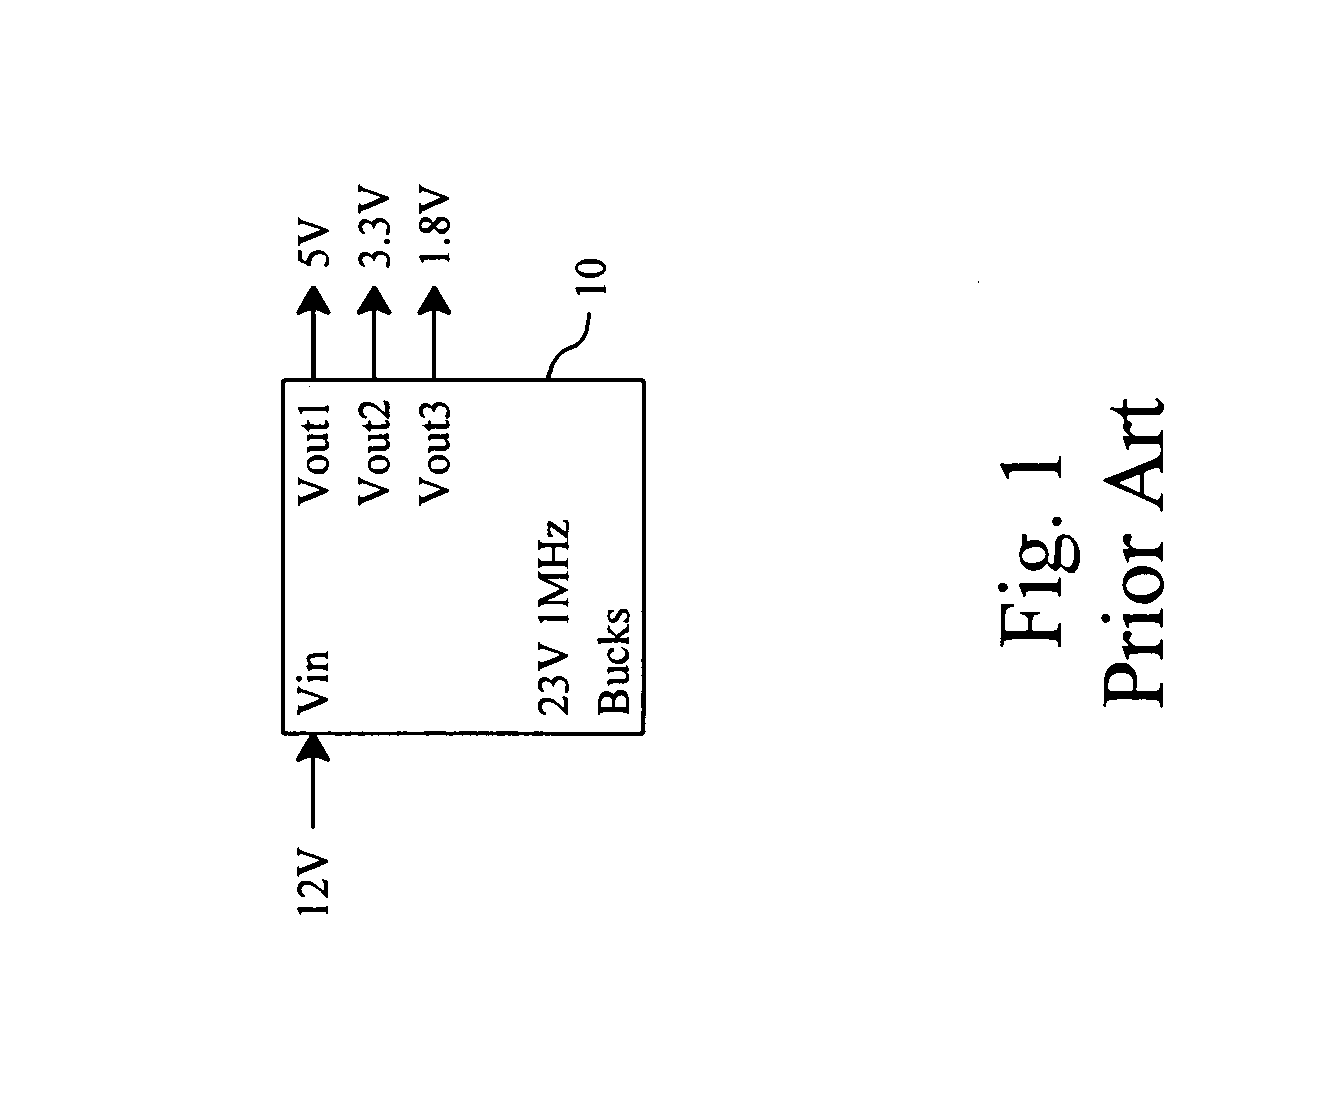 Cross-interference reduction of a buck power converter